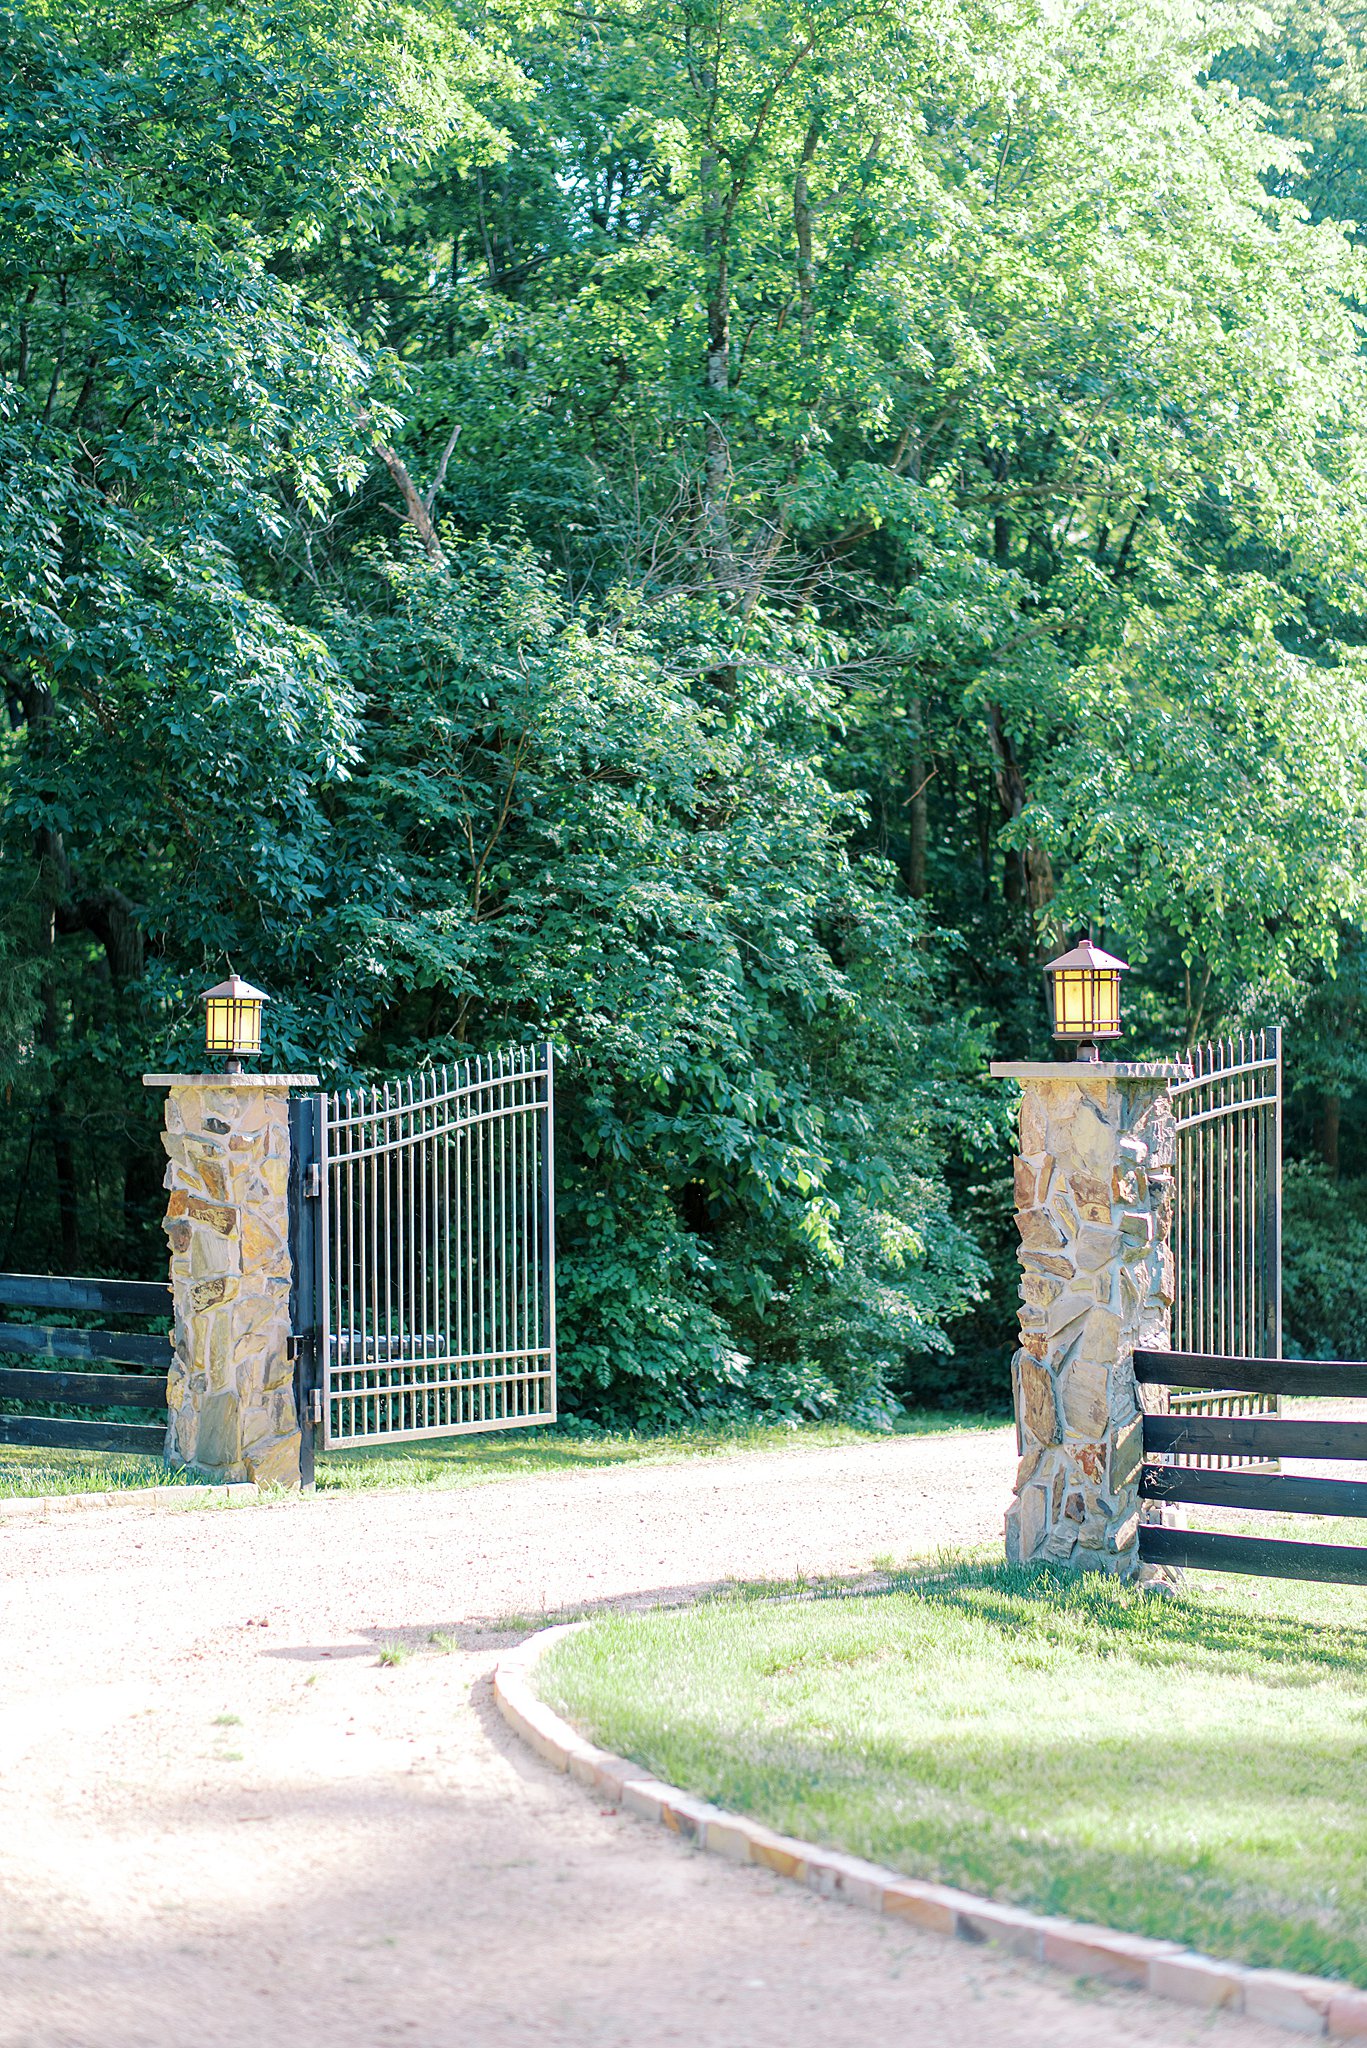 Details of an entrance gate to Morning Glory Farm